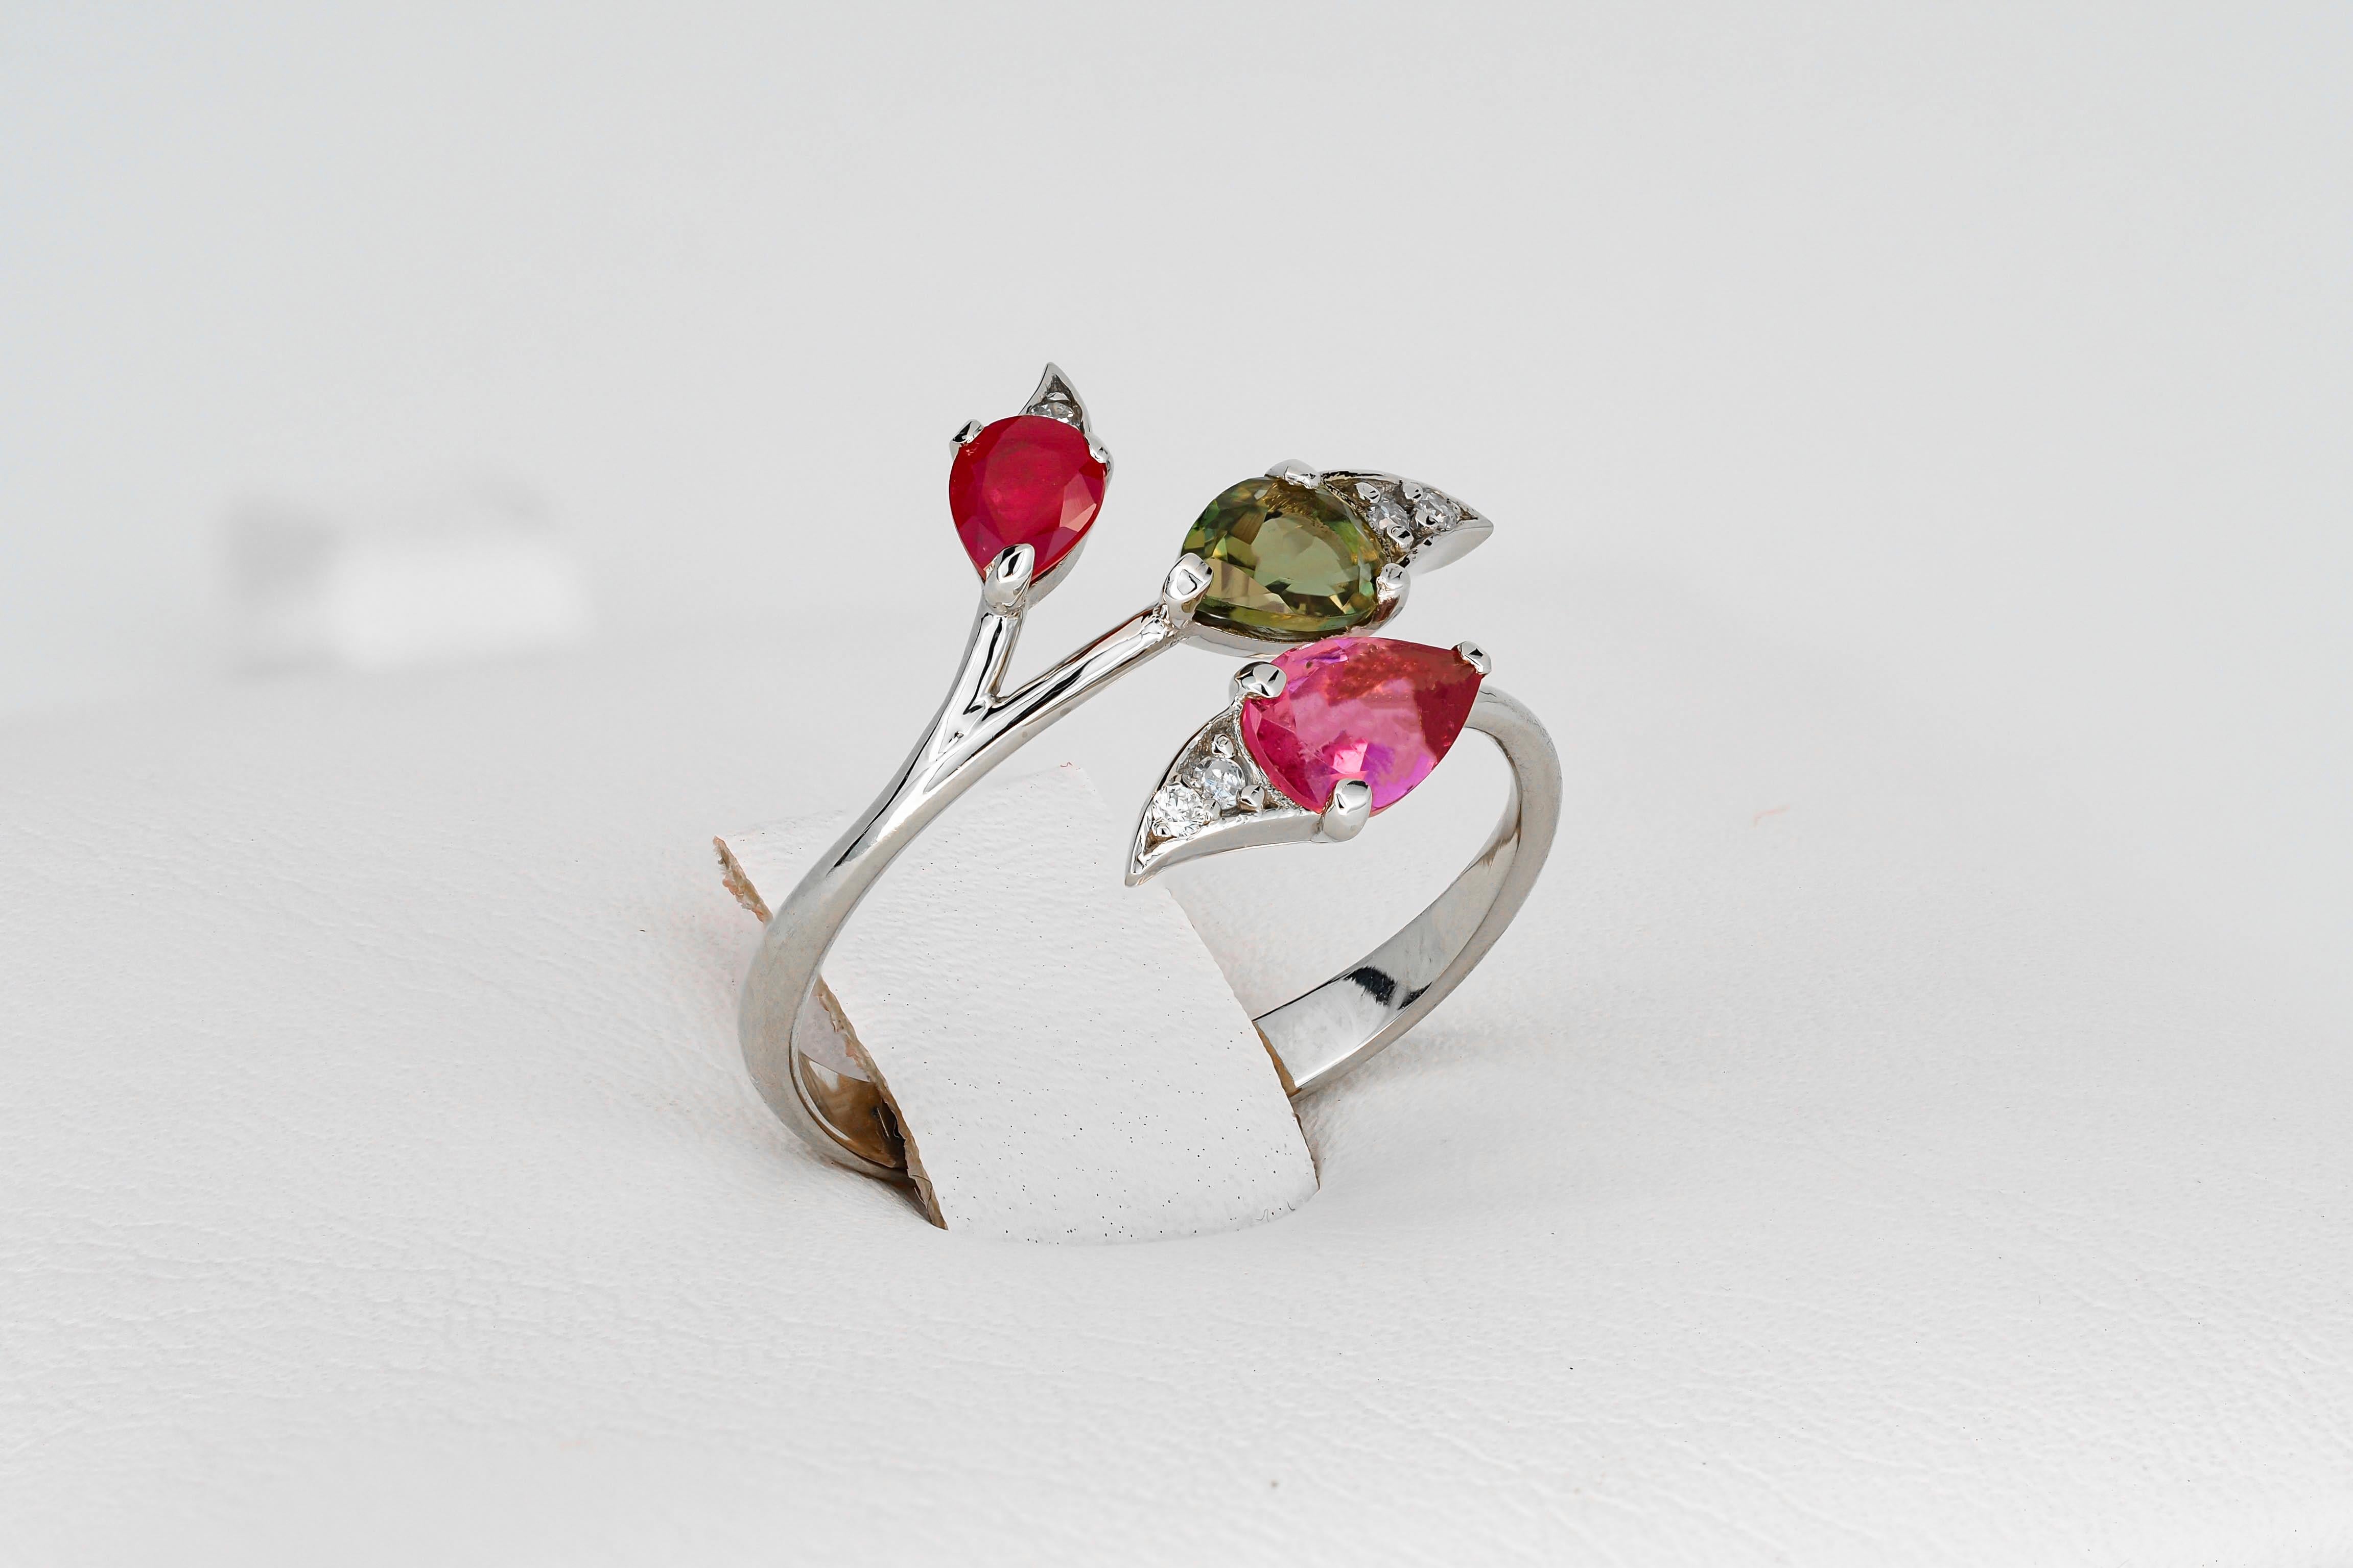 For Sale:  3 gemstone ring. Tourmalines and ruby gold ring. Multicolor gemstones ring. 7